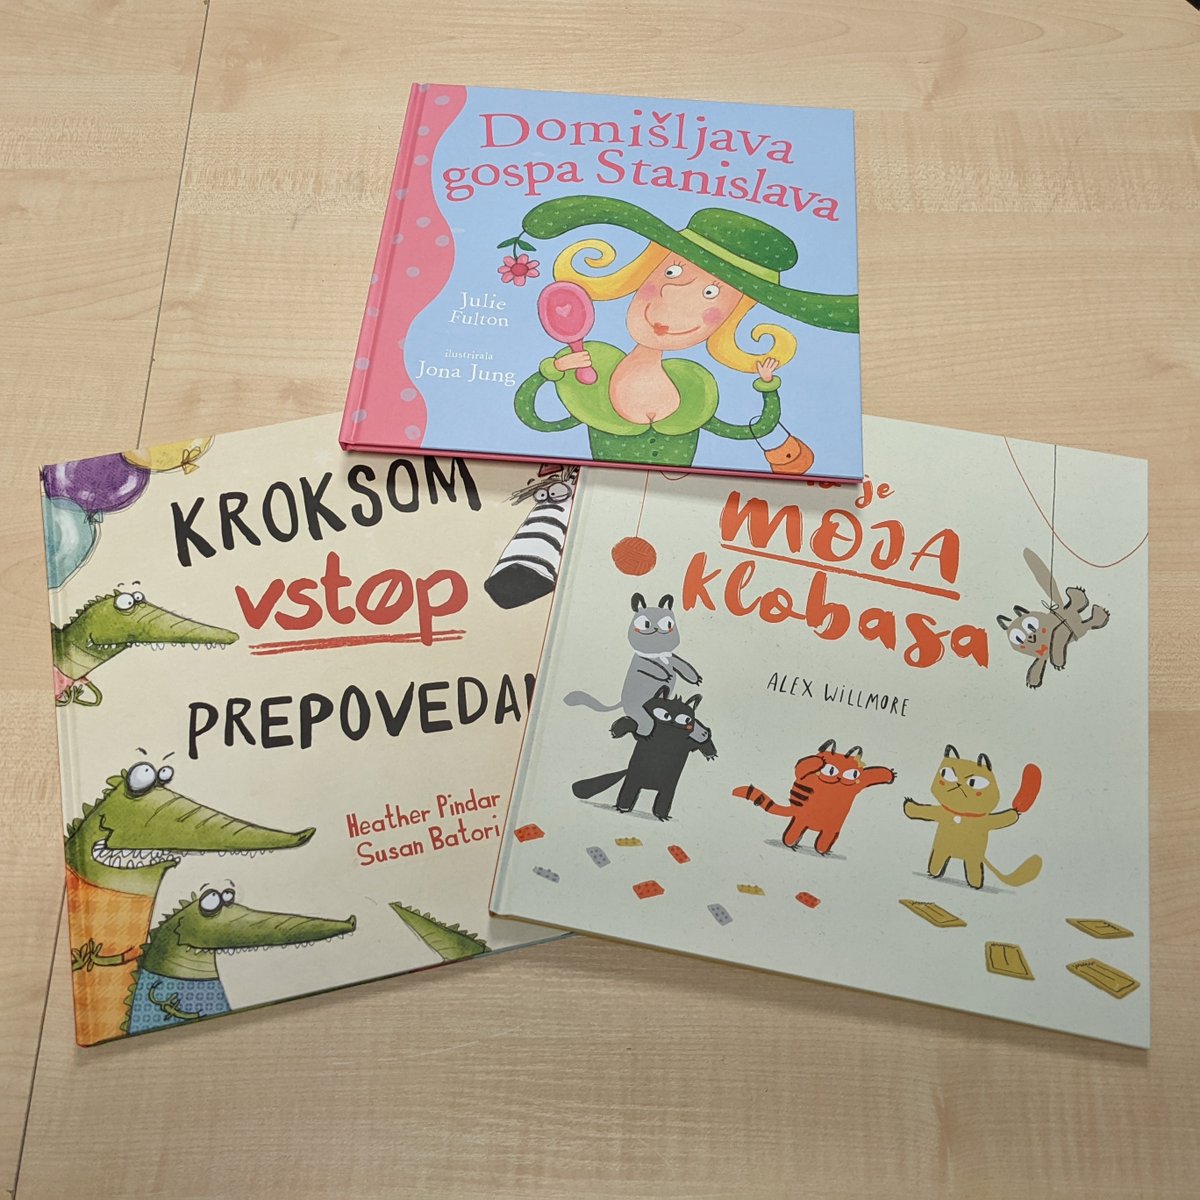 📚 It's fantastic to see our books translated into different languages! Take a look at these Slovenian picture book editions, published by Giks Ed... @HeatherPindar @susanbatori #JulieFulton #JonaJung #AlexWillmore #picturebooks #childrensbooks #booktwt #maverickbooks